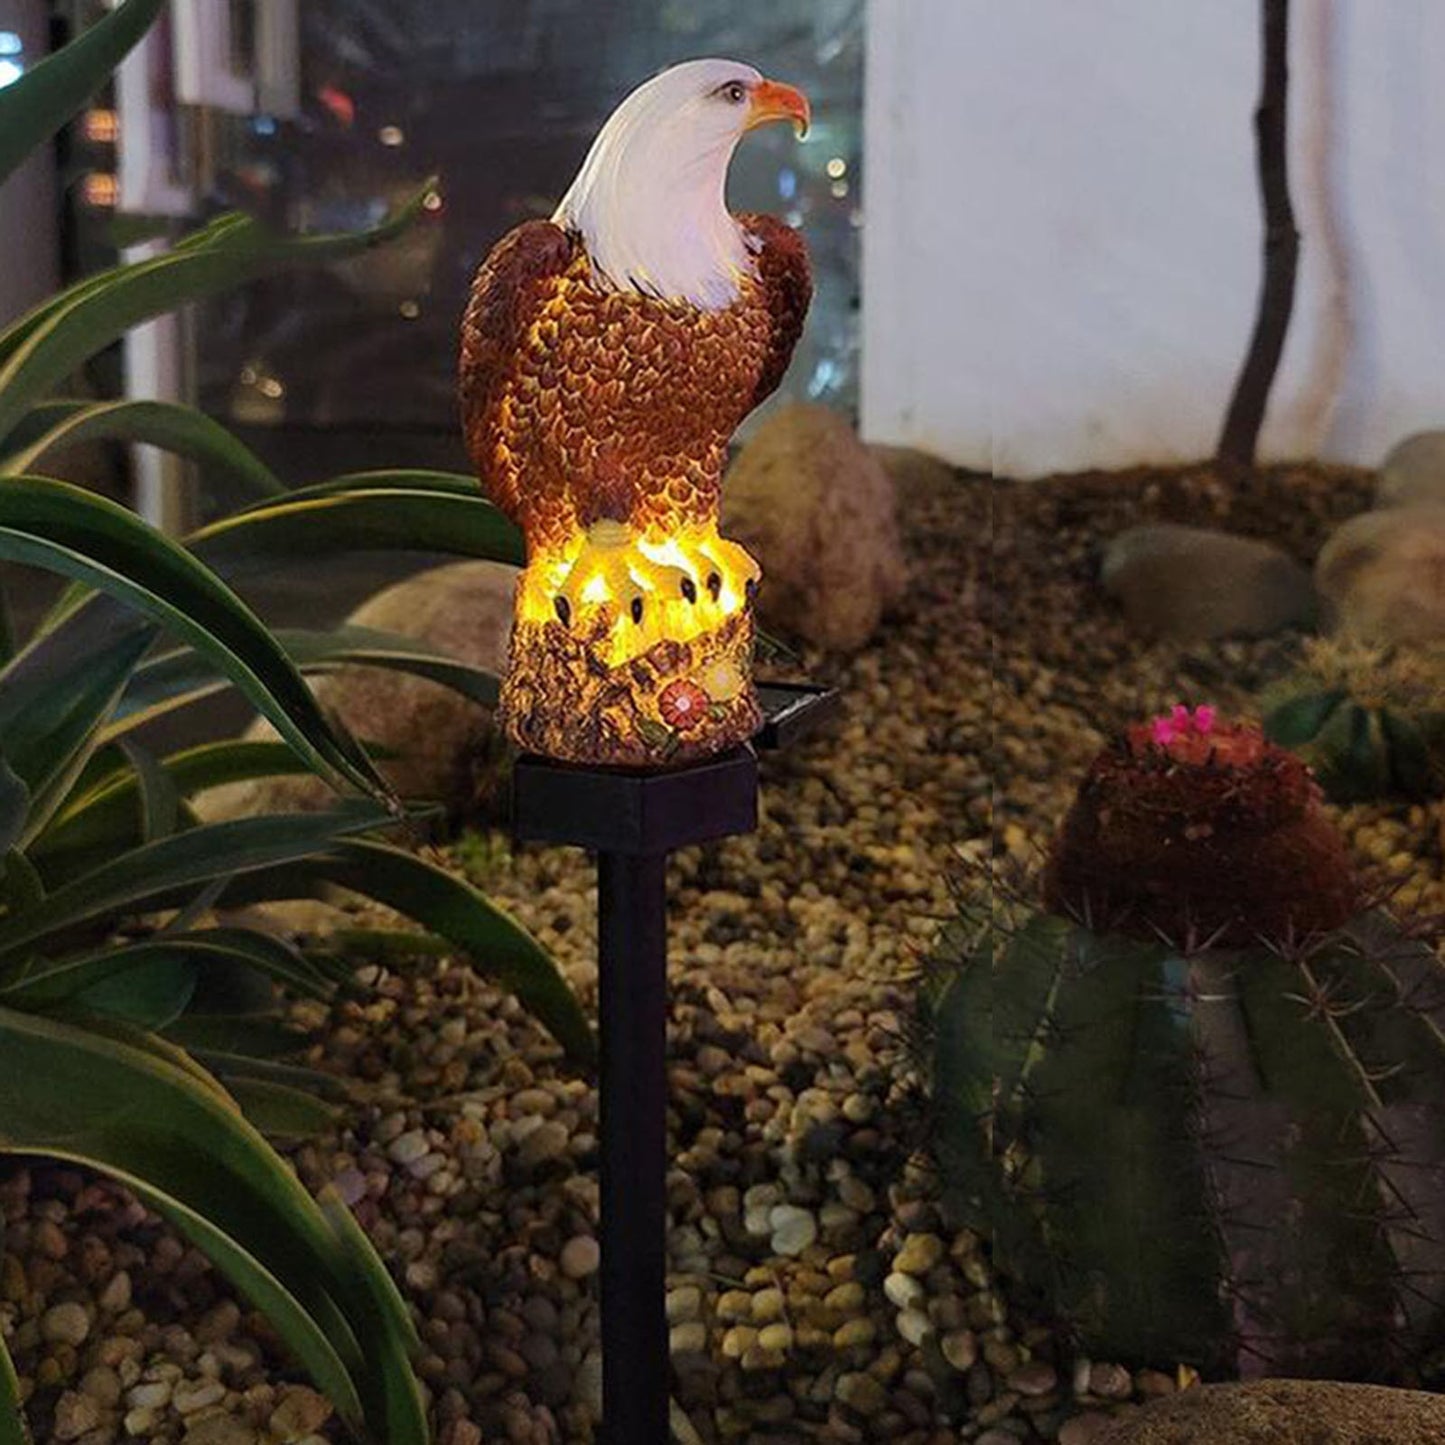 Light Up Your Night with Our Majestic Solar-Powered Eagle